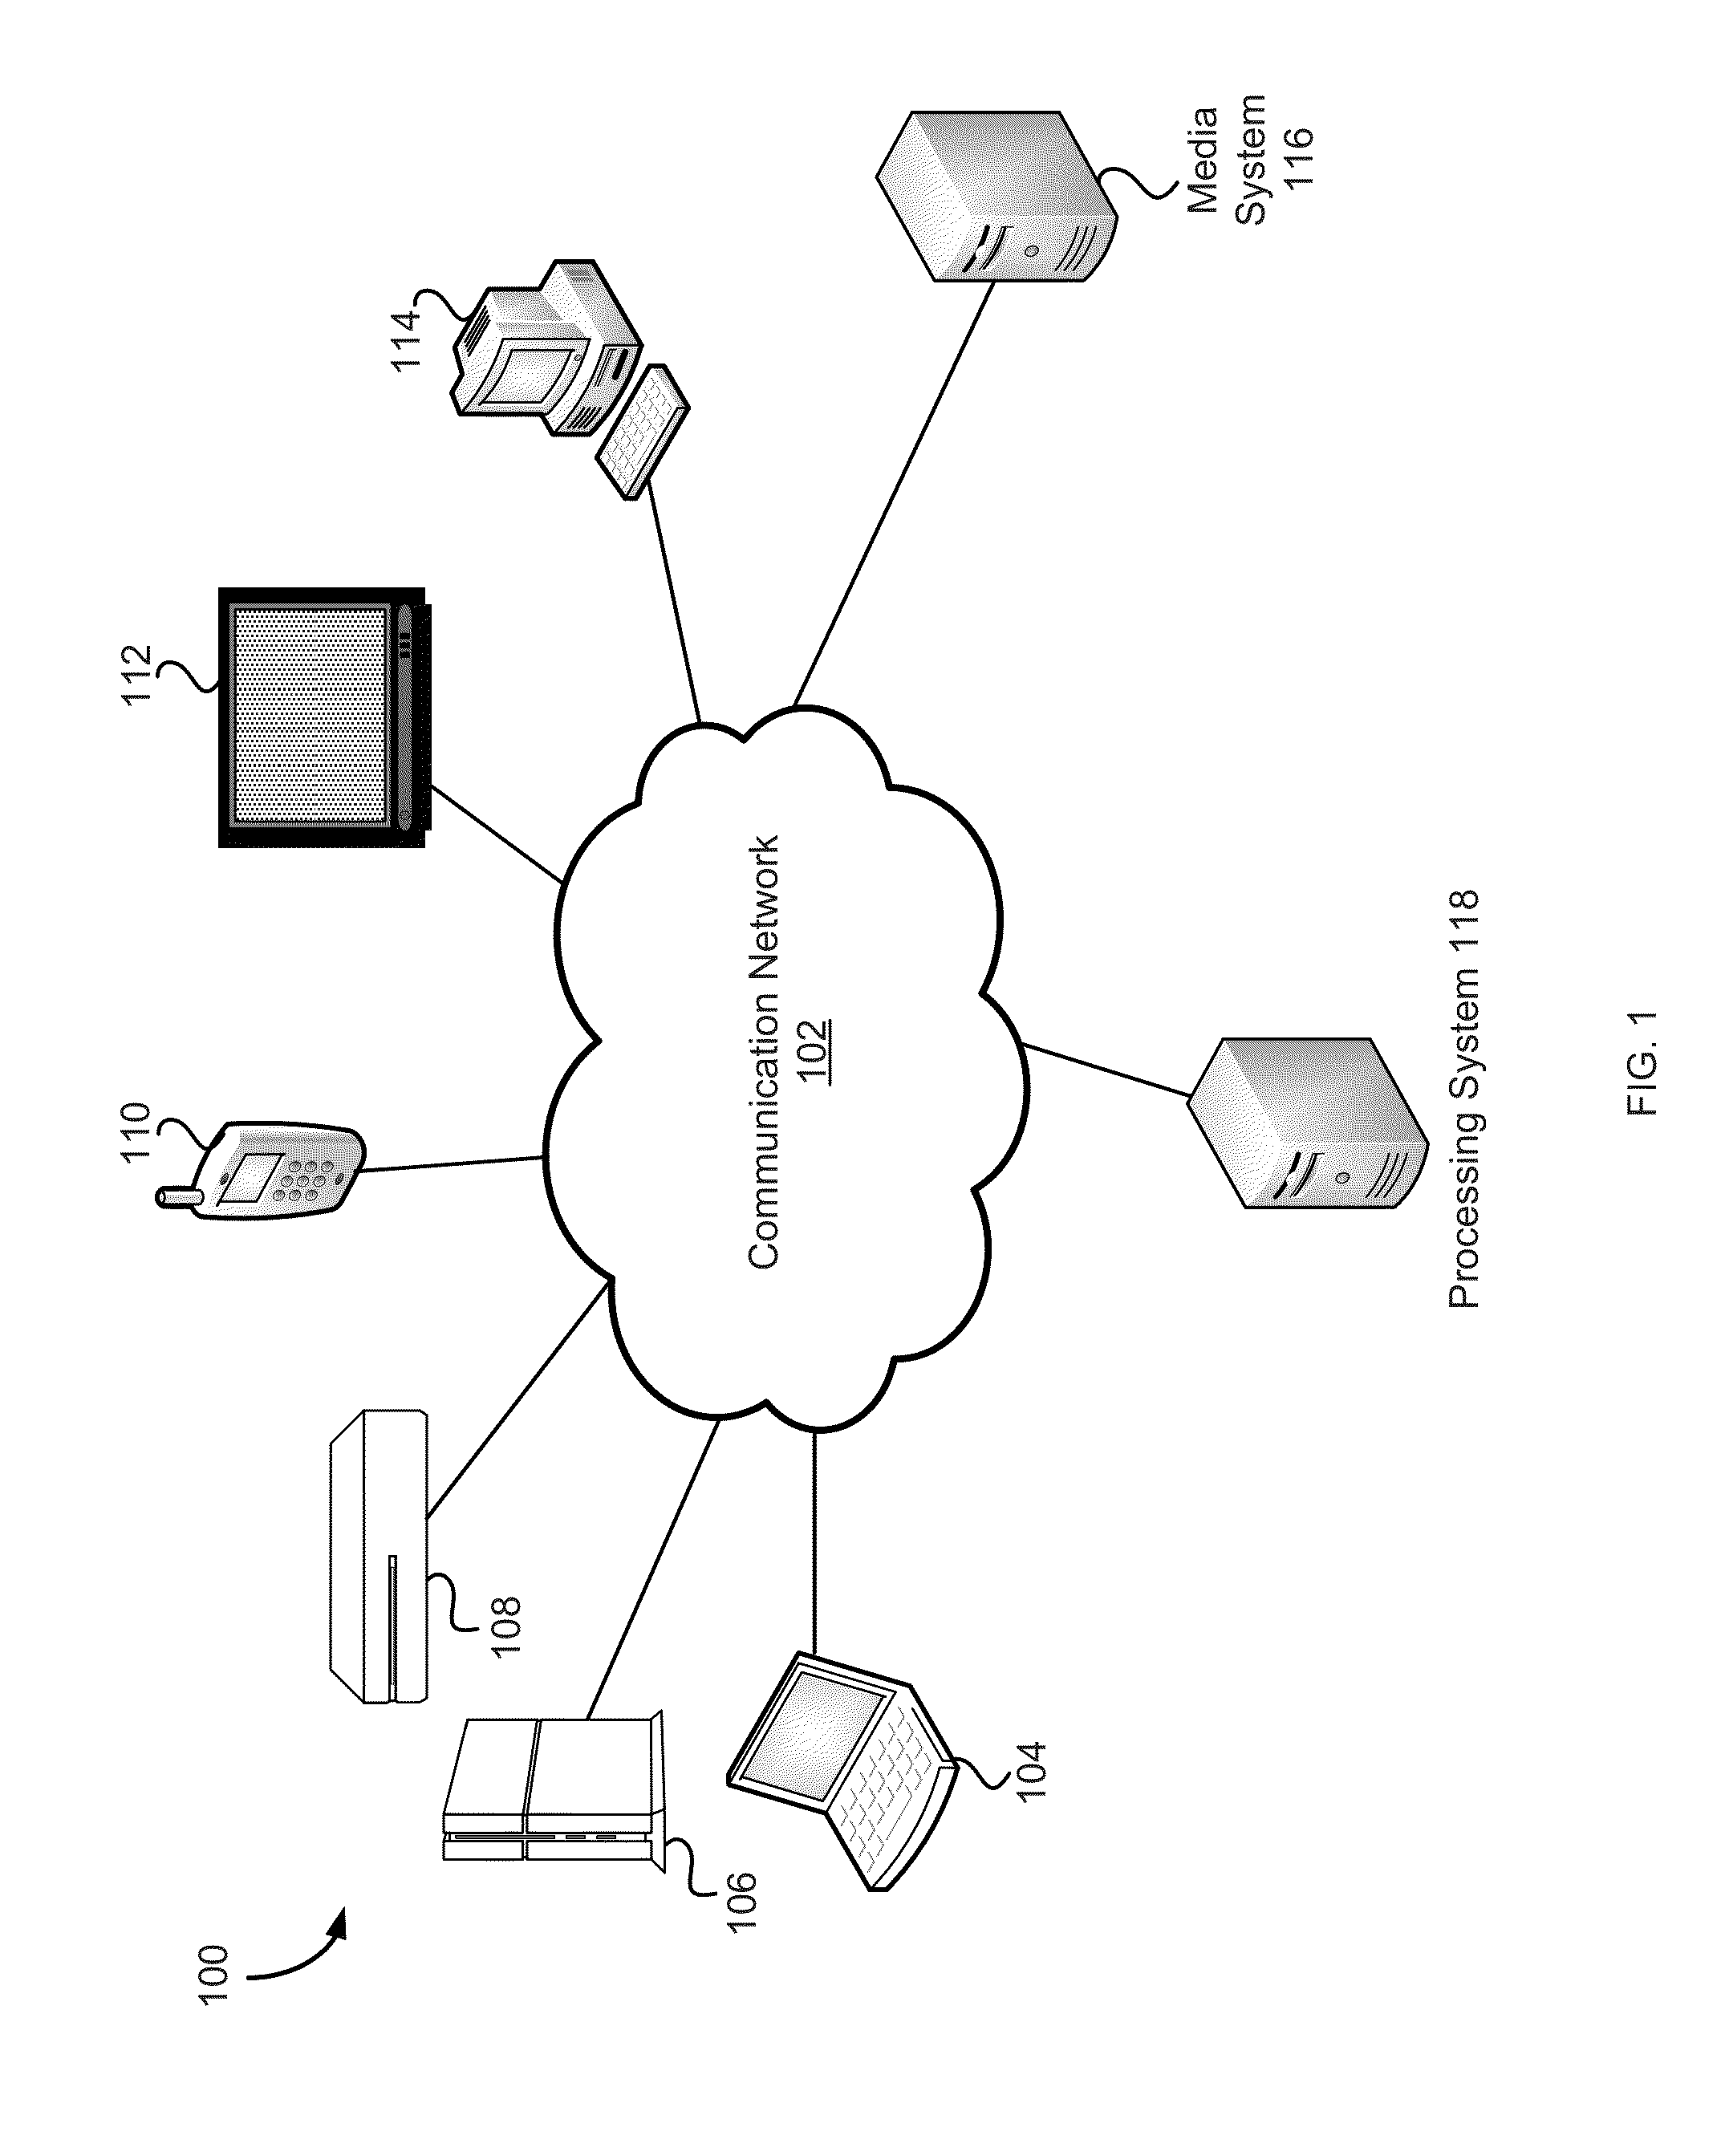 Systems and methods for generating a compilation reel in game video